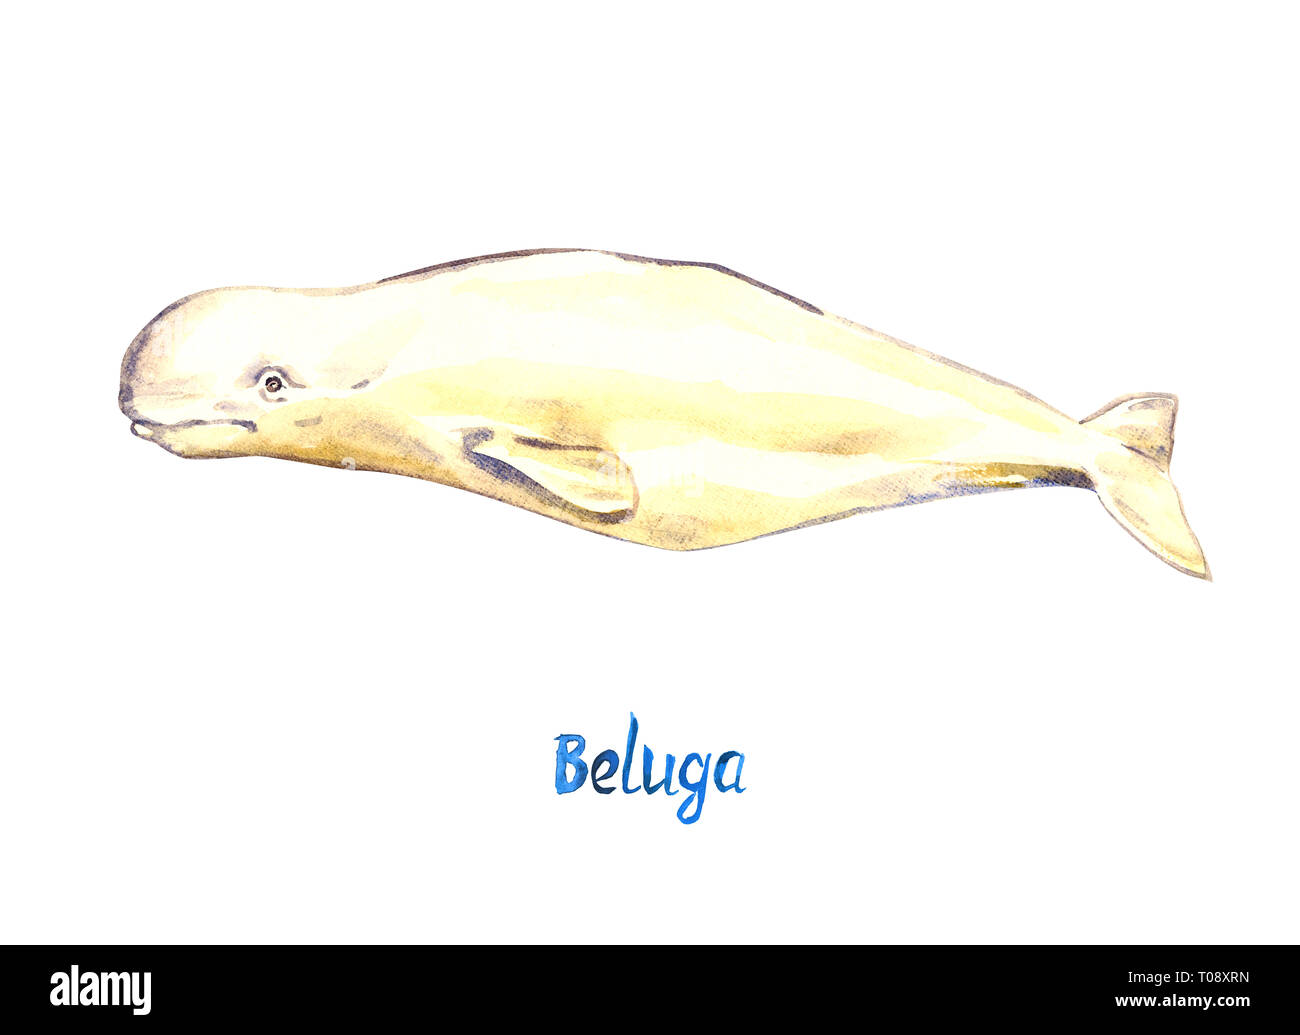 Beluga, isolated on white background hand painted watercolor illustration with handwritten inscription Stock Photo